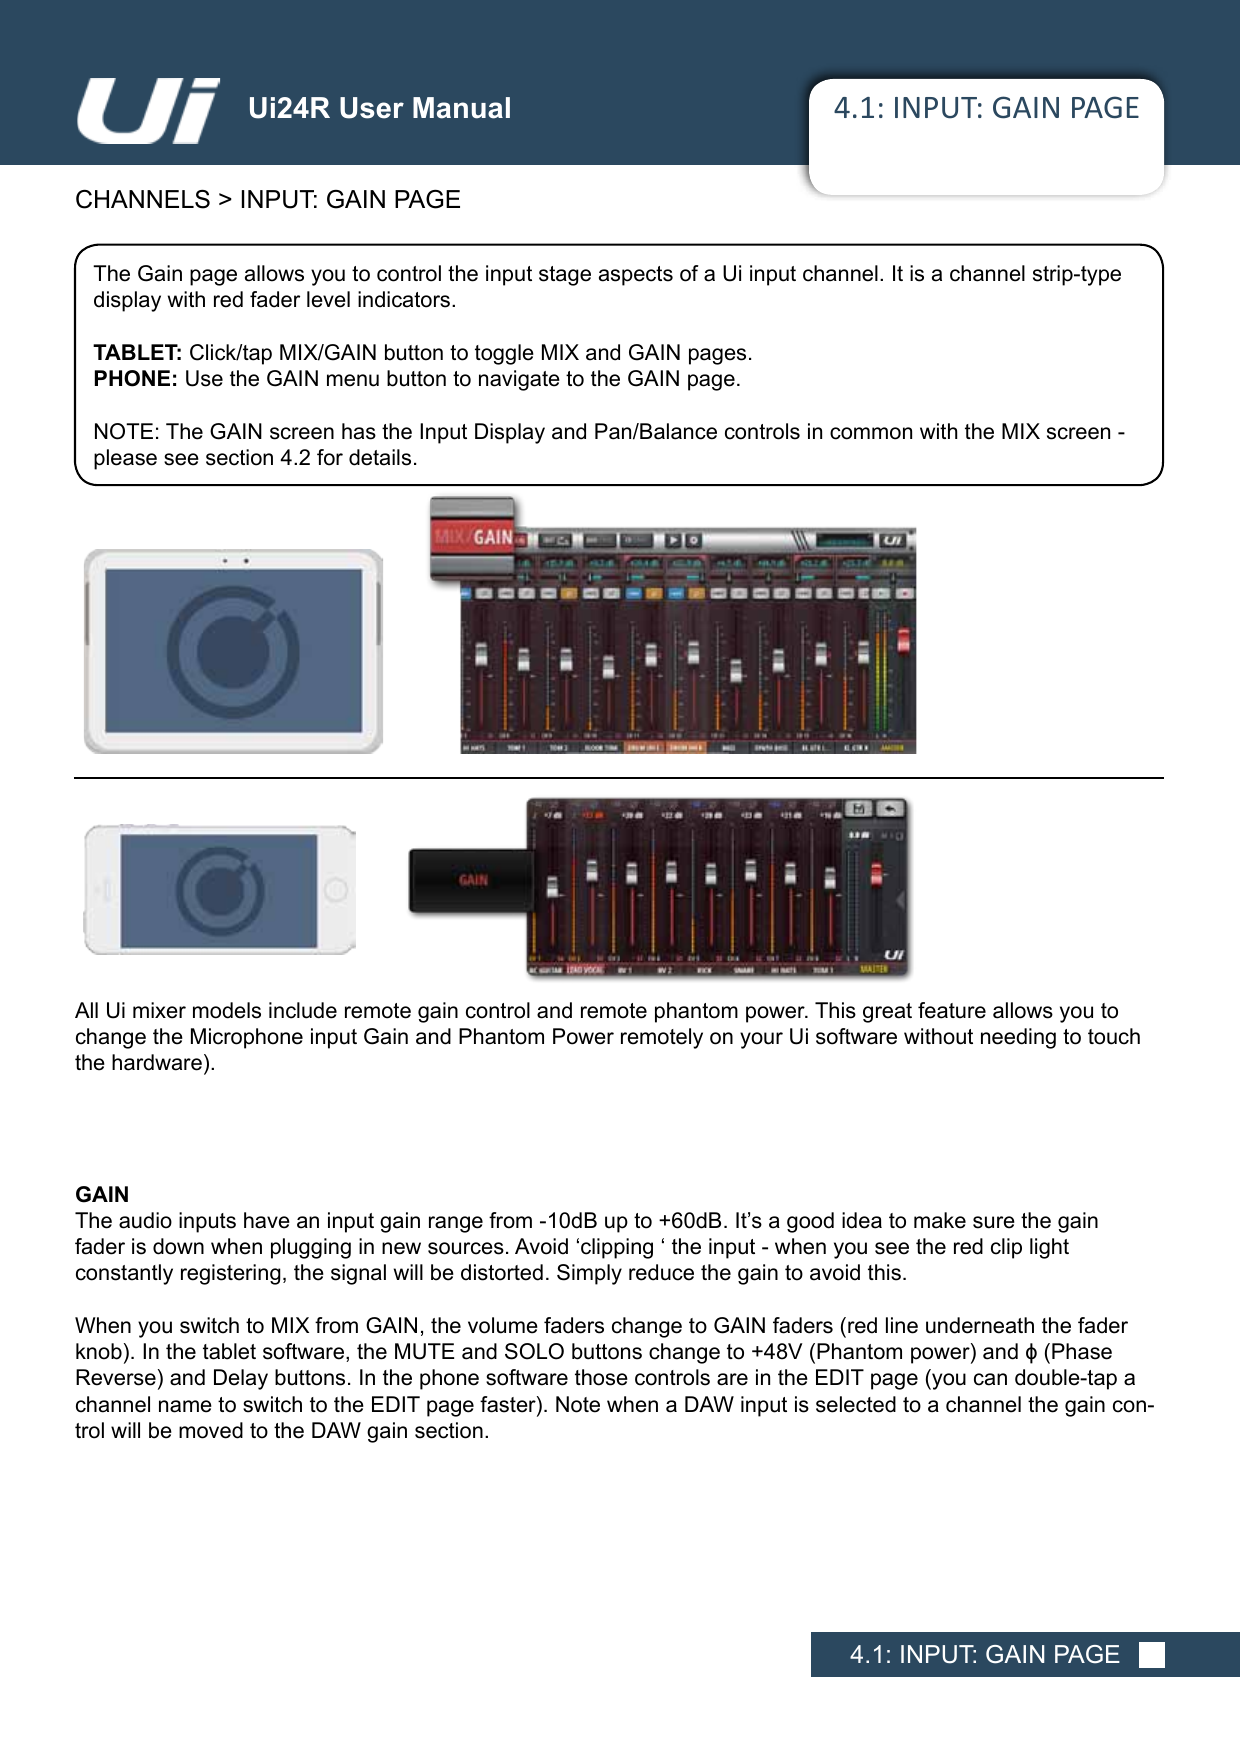 4.1: INPUT: GAIN PAGECHANNELS &gt; INPUT: GAIN PAGE4.1: INPUT: GAIN PAGEUi24R User ManualThe Gain page allows you to control the input stage aspects of a Ui input channel. It is a channel strip-type display with red fader level indicators. TABLET: Click/tap MIX/GAIN button to toggle MIX and GAIN pages.PHONE: Use the GAIN menu button to navigate to the GAIN page.NOTE: The GAIN screen has the Input Display and Pan/Balance controls in common with the MIX screen - please see section 4.2 for details.All Ui mixer models include remote gain control and remote phantom power. This great feature allows you to change the Microphone input Gain and Phantom Power remotely on your Ui software without needing to touch thehardware).GAINTheaudioinputshaveaninputgainrangefrom-10dBupto+60dB.It’sagoodideatomakesurethegain fader is down when plugging in new sources. Avoid ‘clipping ‘ the input - when you see the red clip light  constantly registering, the signal will be distorted. Simply reduce the gain to avoid this.WhenyouswitchtoMIXfromGAIN,thevolumefaderschangetoGAINfaders(redlineunderneaththefaderknob).Inthetabletsoftware,theMUTEandSOLObuttonschangeto+48V(Phantompower)andϕ(Phase Reverse)andDelaybuttons.InthephonesoftwarethosecontrolsareintheEDITpage(youcandouble-tapachannelnametoswitchtotheEDITpagefaster).NotewhenaDAWinputisselectedtoachannelthegaincon-trol will be moved to the DAW gain section.